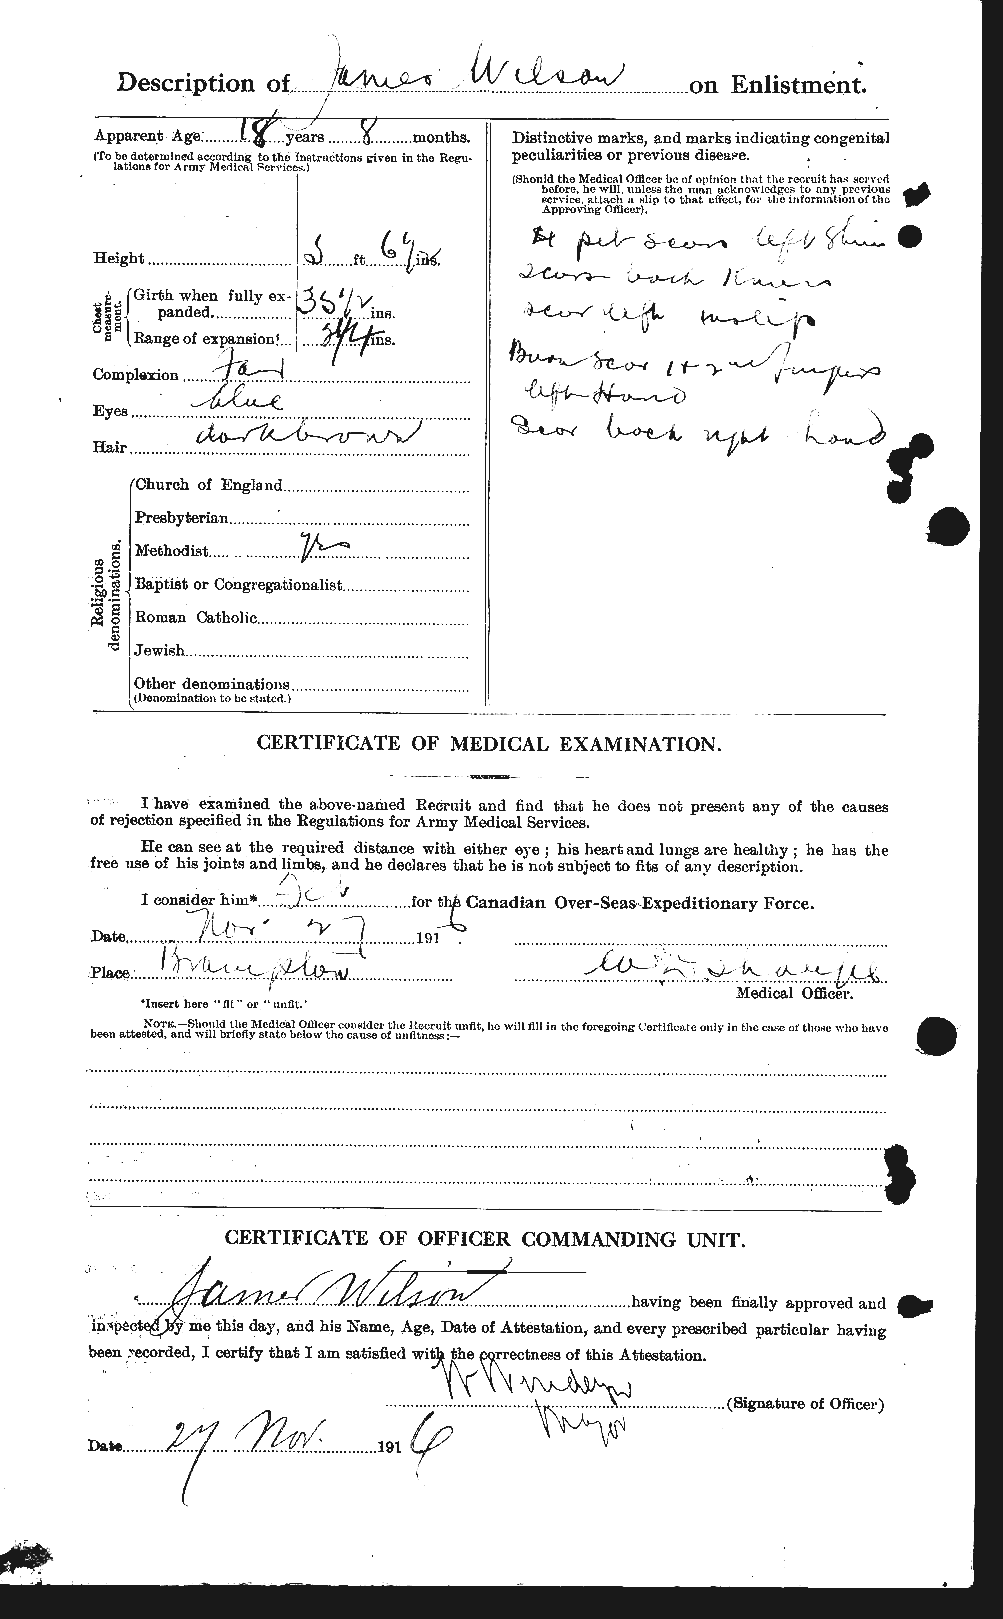 Personnel Records of the First World War - CEF 681493b